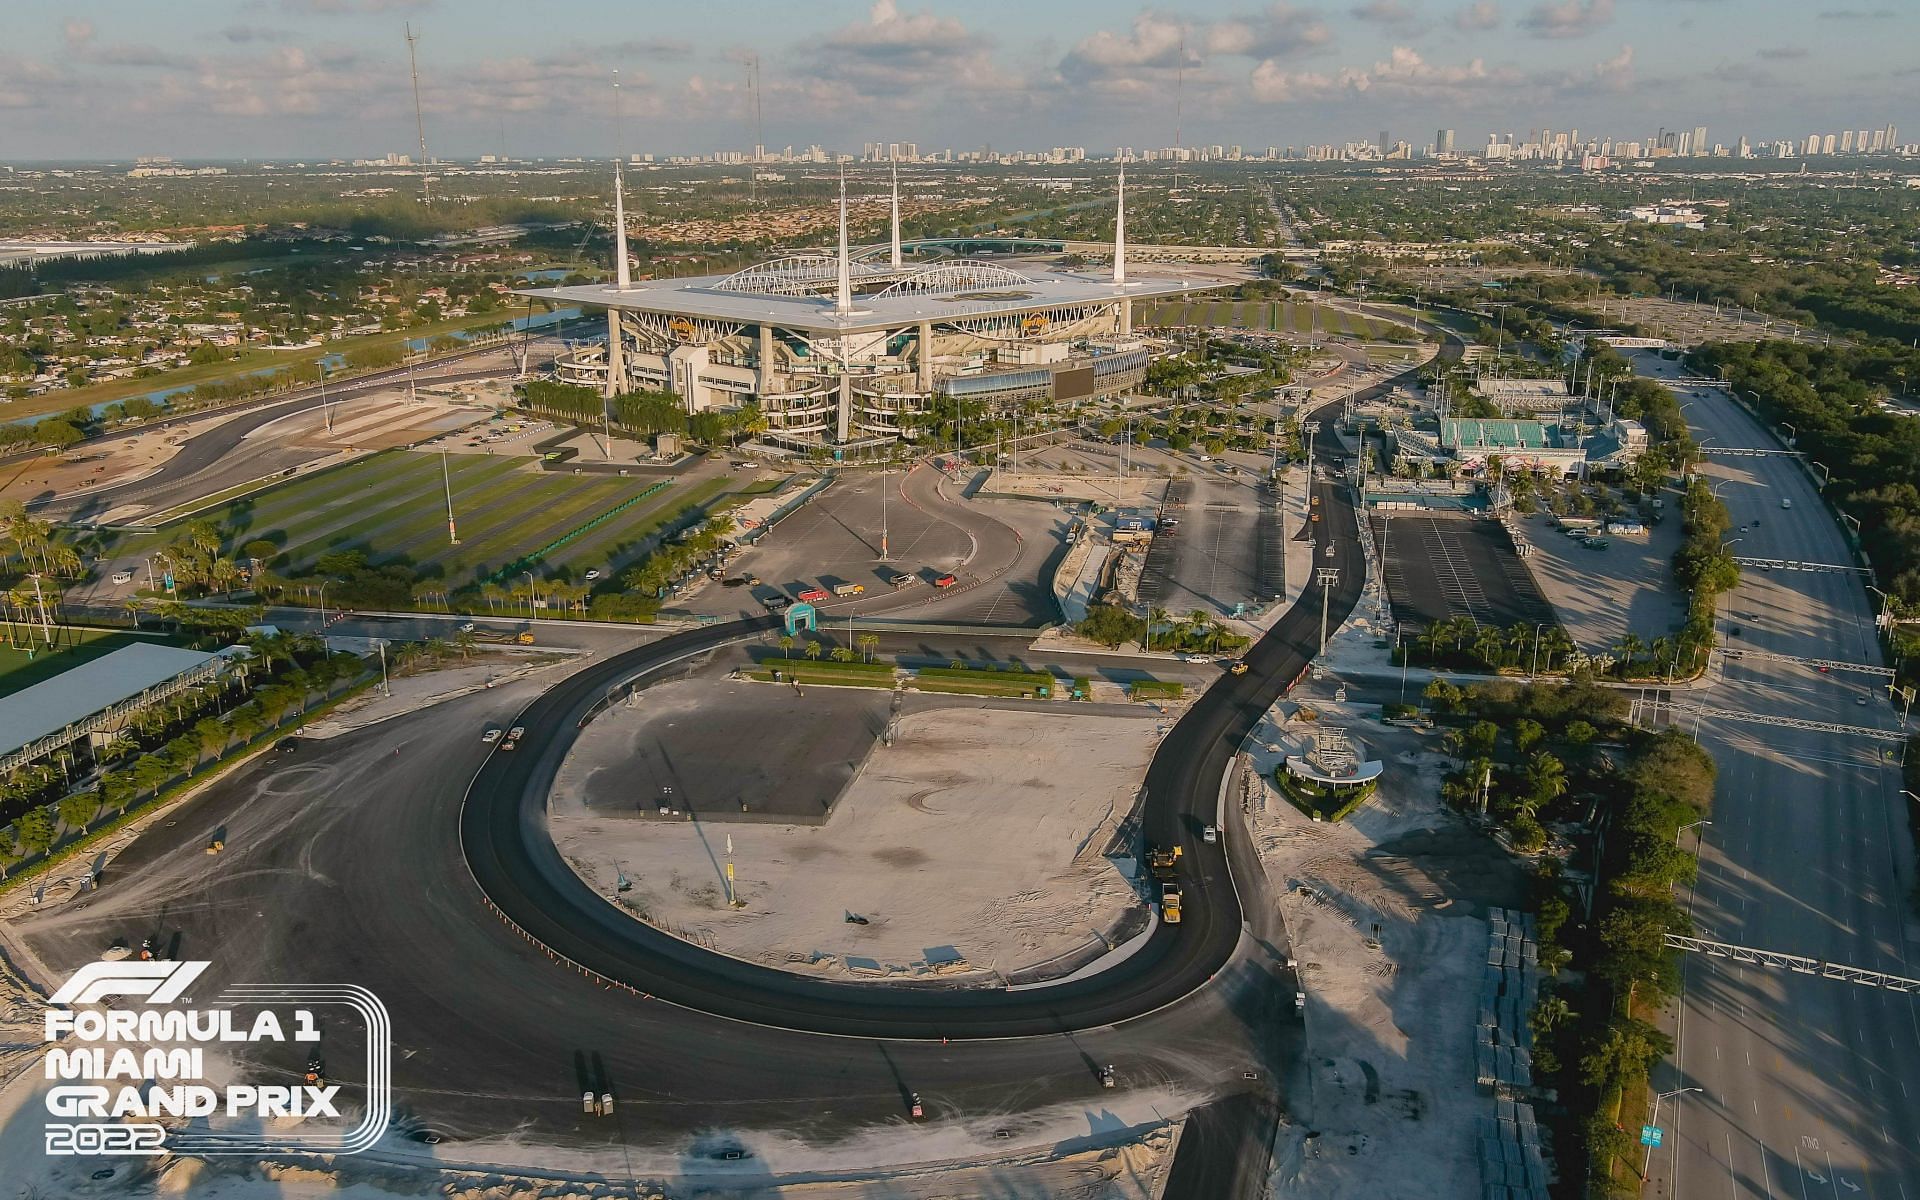 The Aerial shot of the Miami GP circuit